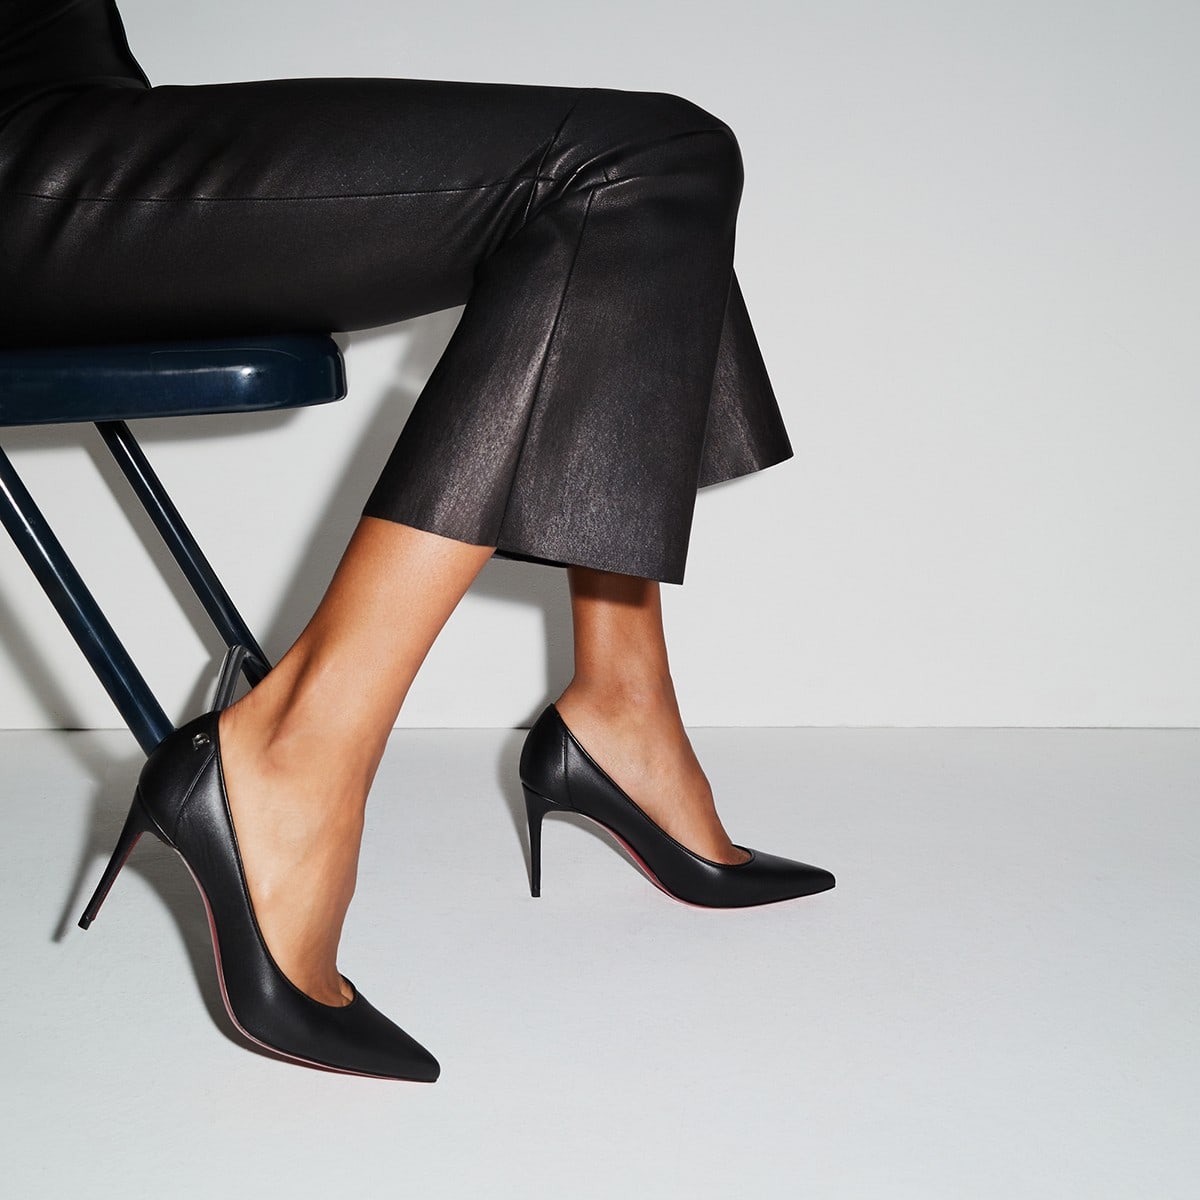 A sleek black nappa leather pump featuring a pointed toe, a plunging vamp to elegantly showcase the foot, set on an 85 mm heel, and adorned with the iconic Maison Christian Louboutin logo at the back